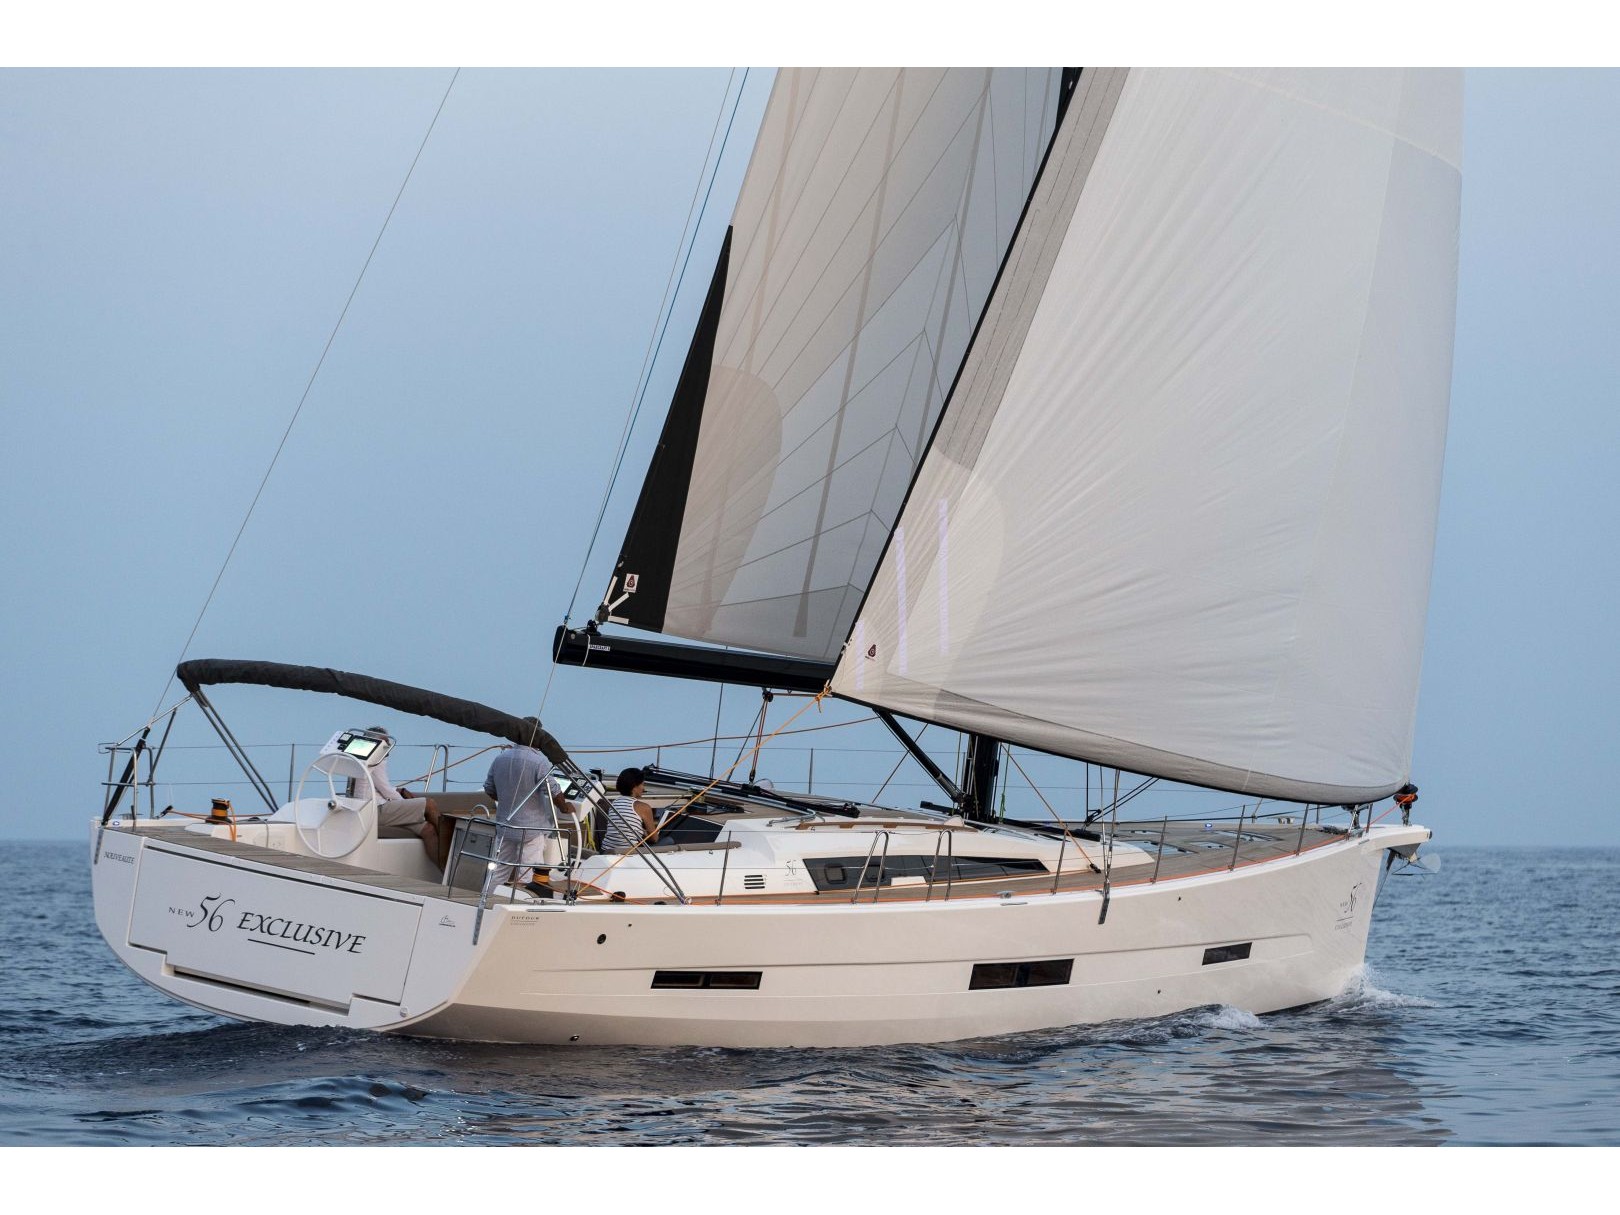 Dufour 56 Exclusive - Yacht Charter Ragusa & Boat hire in Italy Sicily Ragusa Marina di Ragusa 2